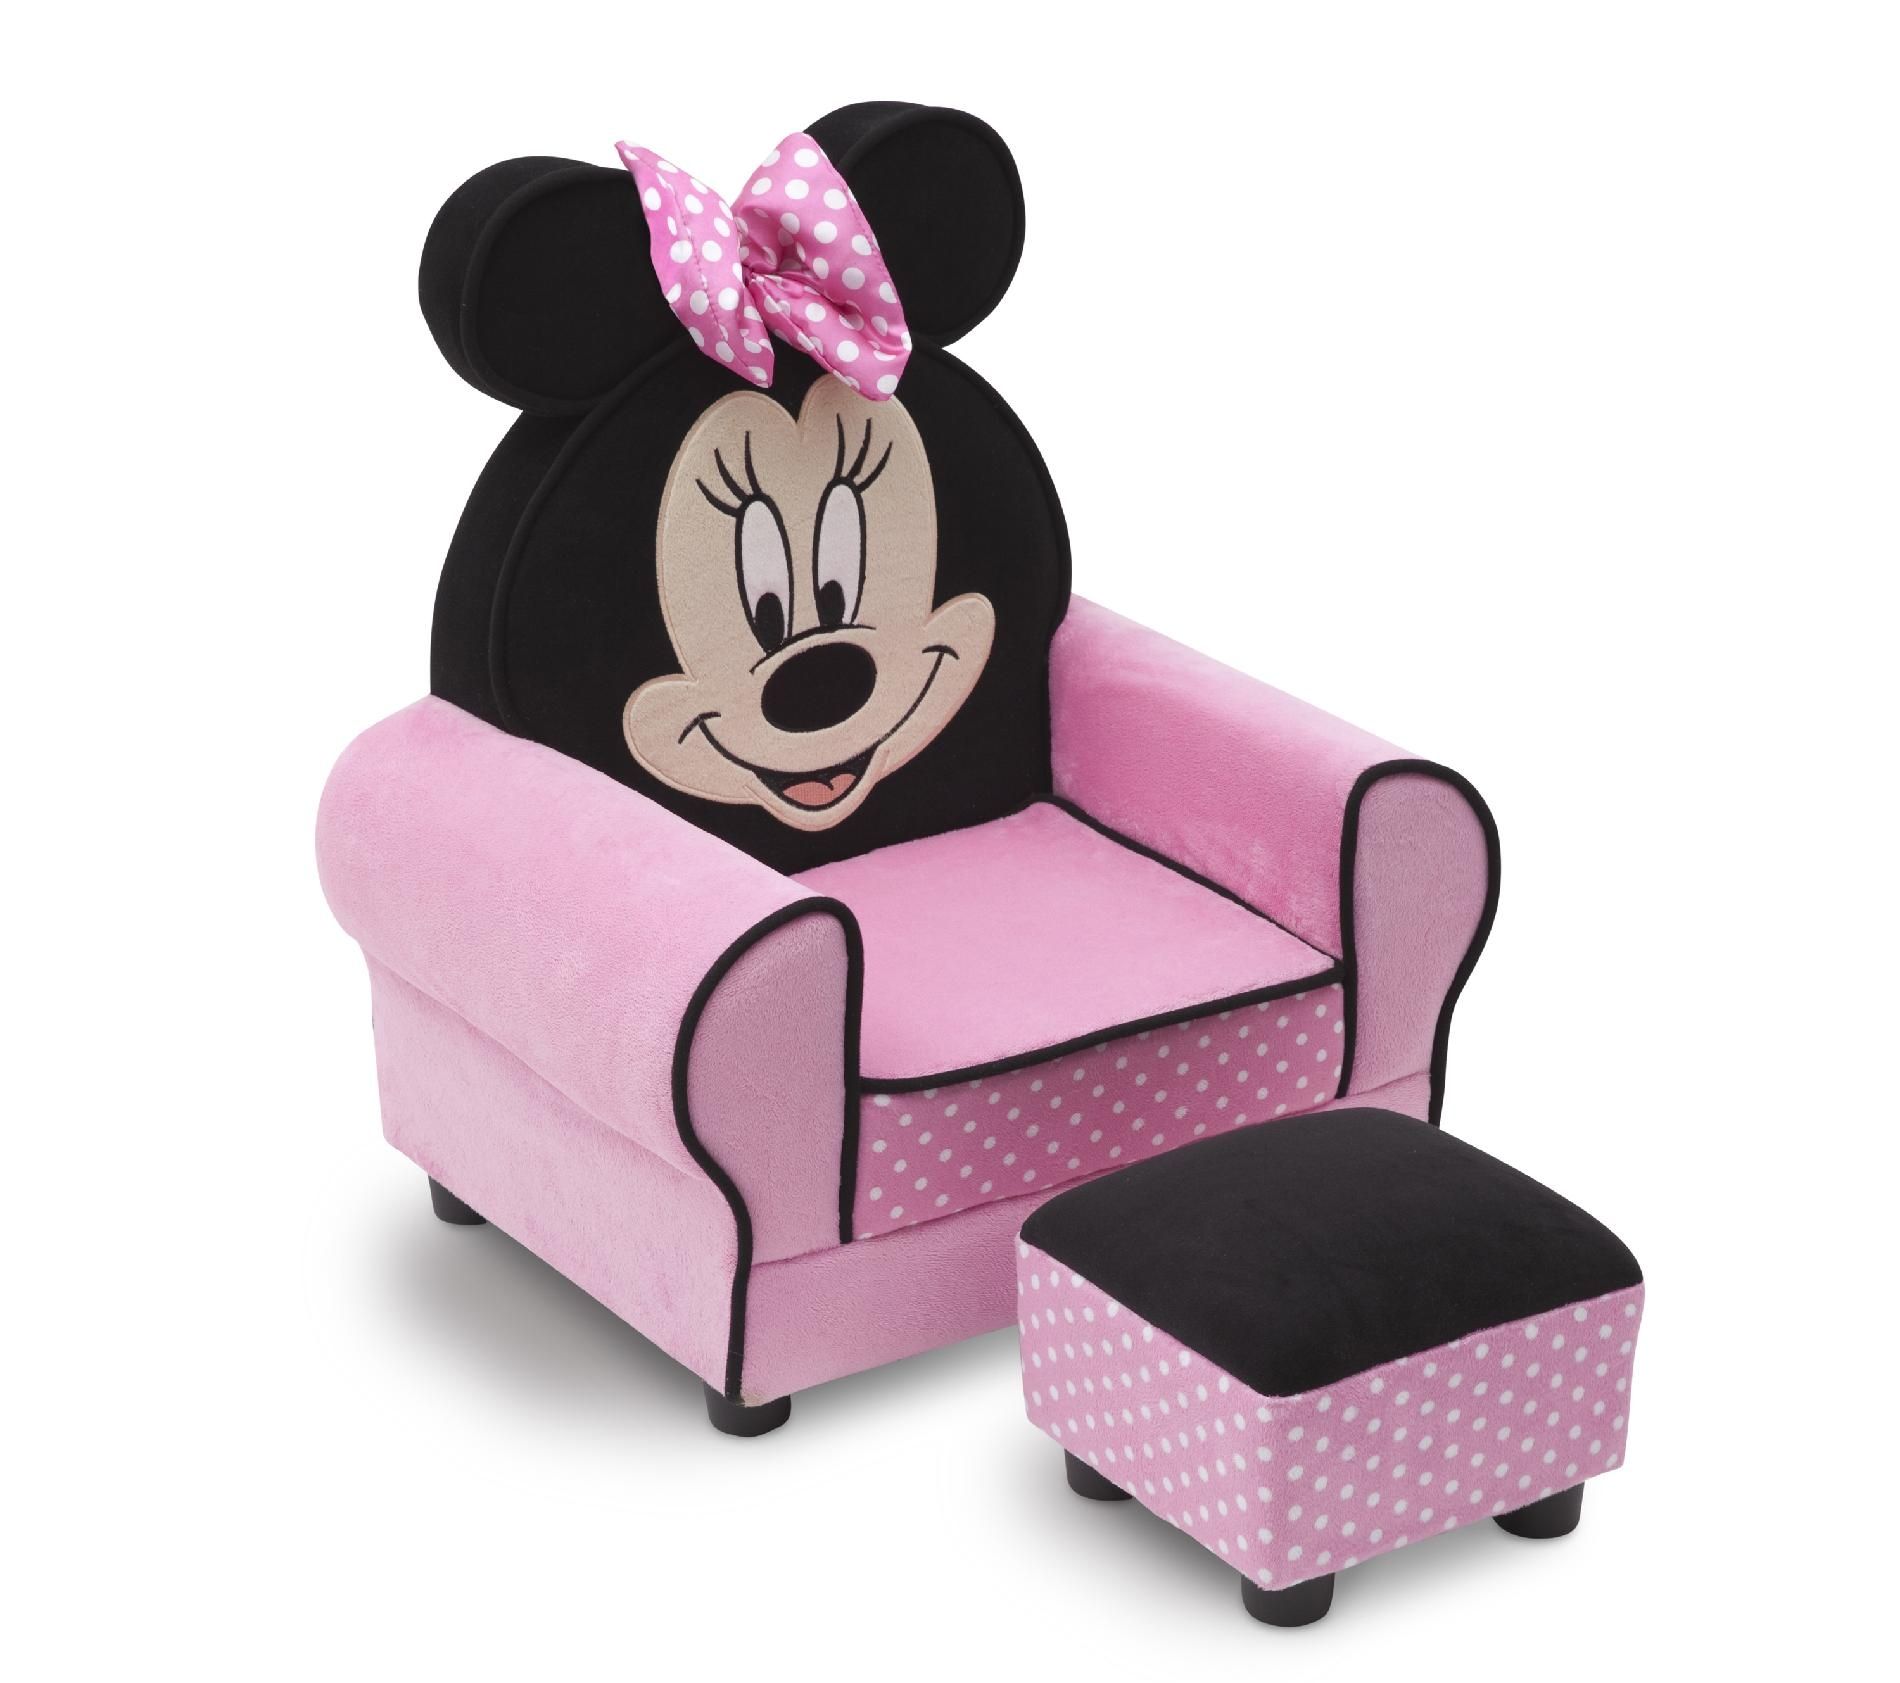 Disney Mickey Mouse Clubhouse Toddler Sofa Chair And Ottoman Regarding Toddler Sofa Chairs (View 13 of 15)